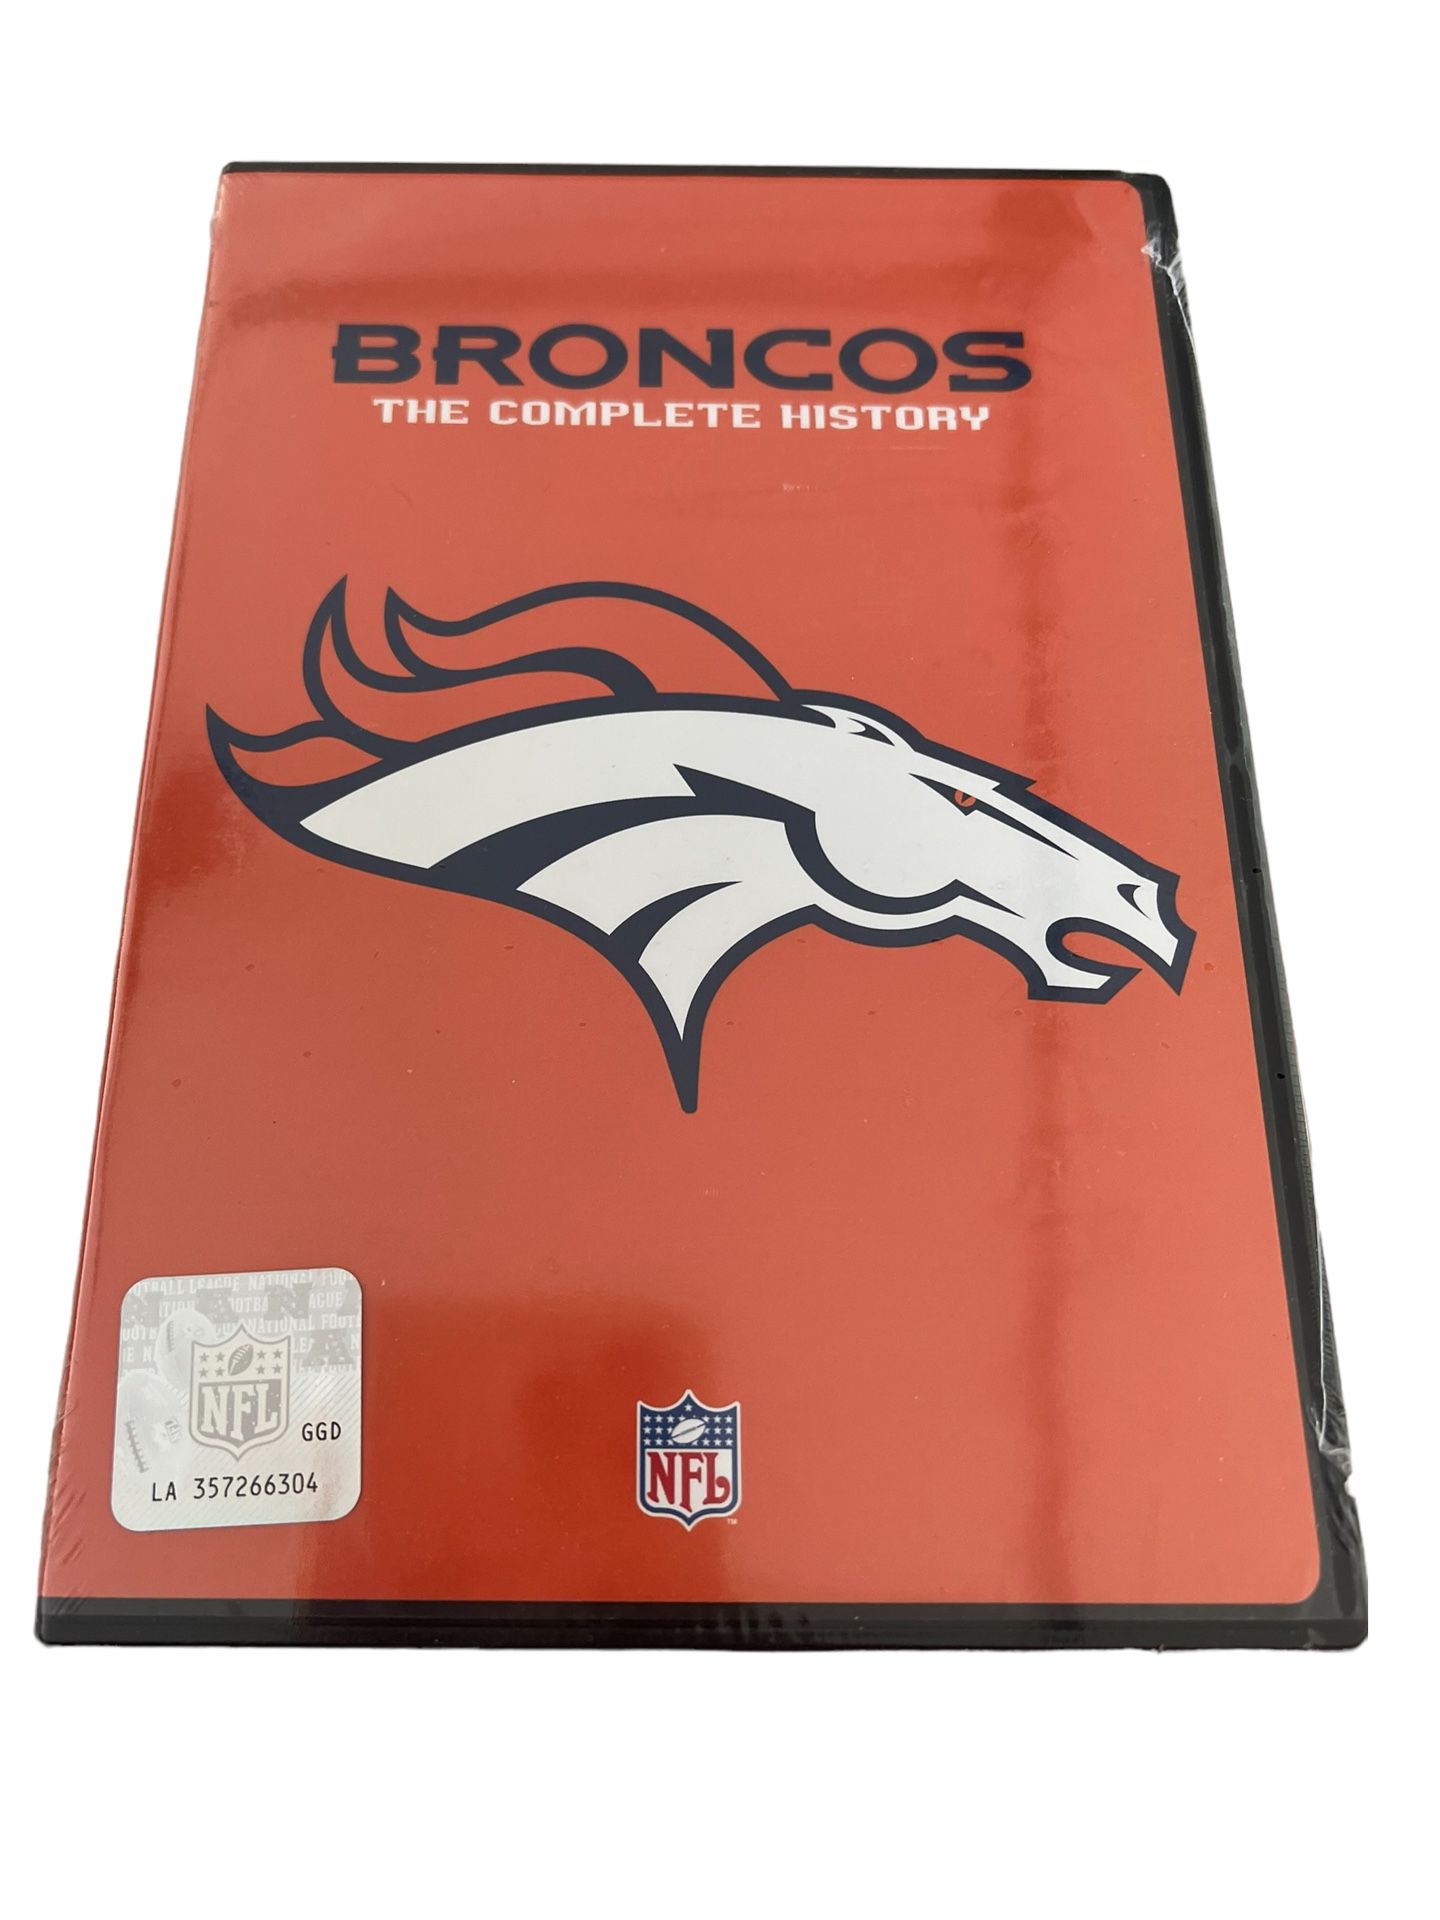 Denver Broncos The Complete NFL History 50 Years 373 Minutes DVD New Sealed  This Denver Broncos DVD offers a complete retrospective of the team's 50-